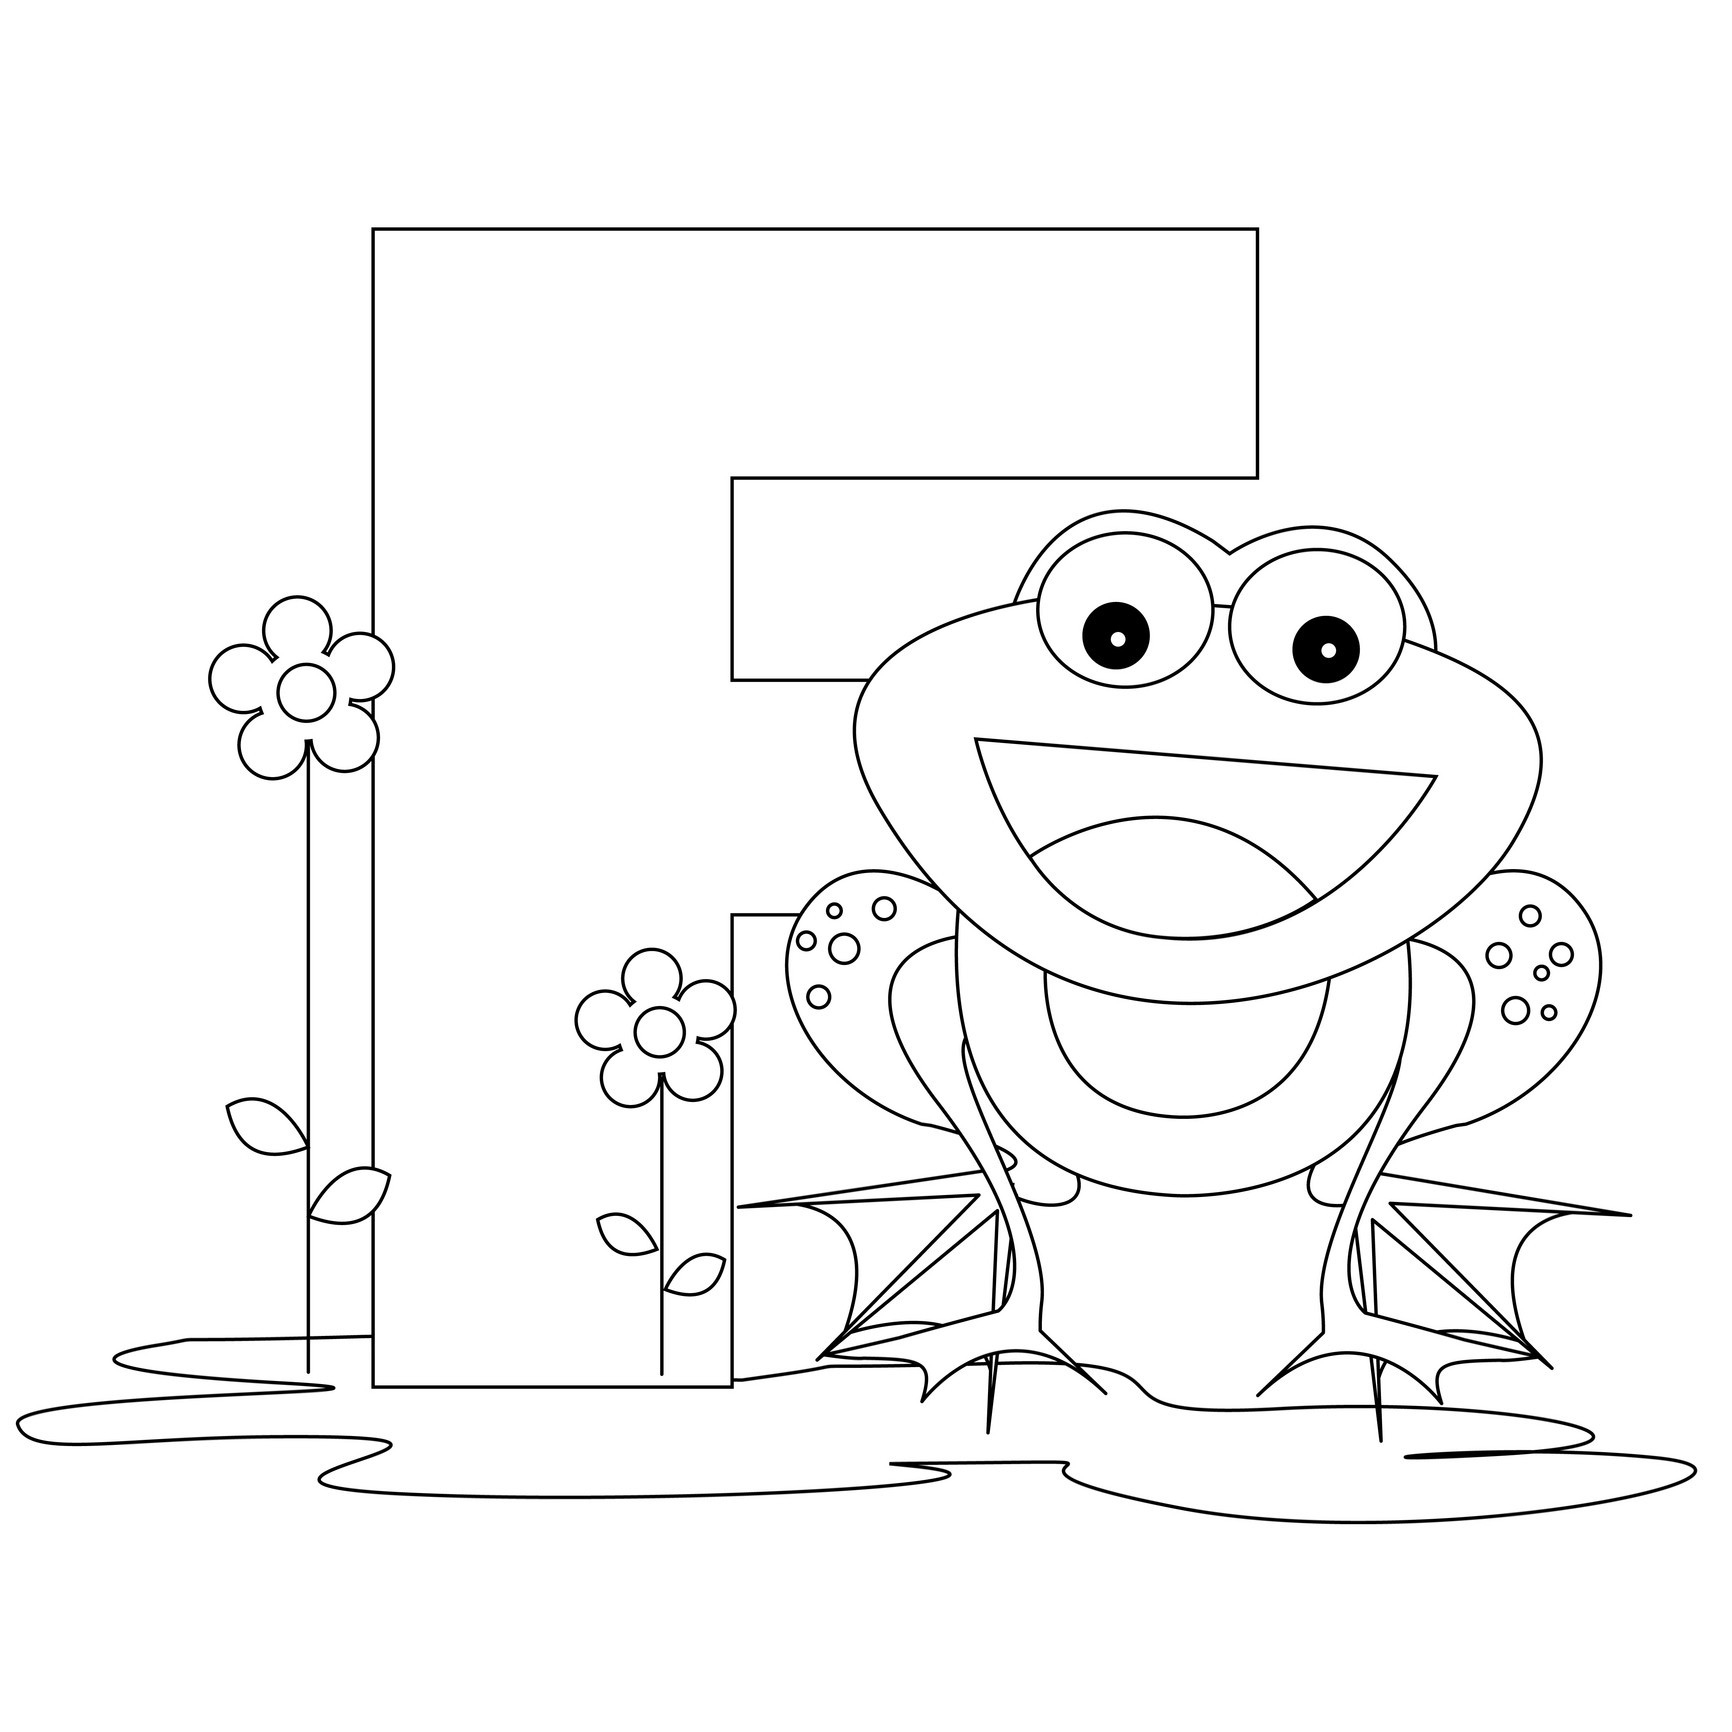 capital letter i coloring page